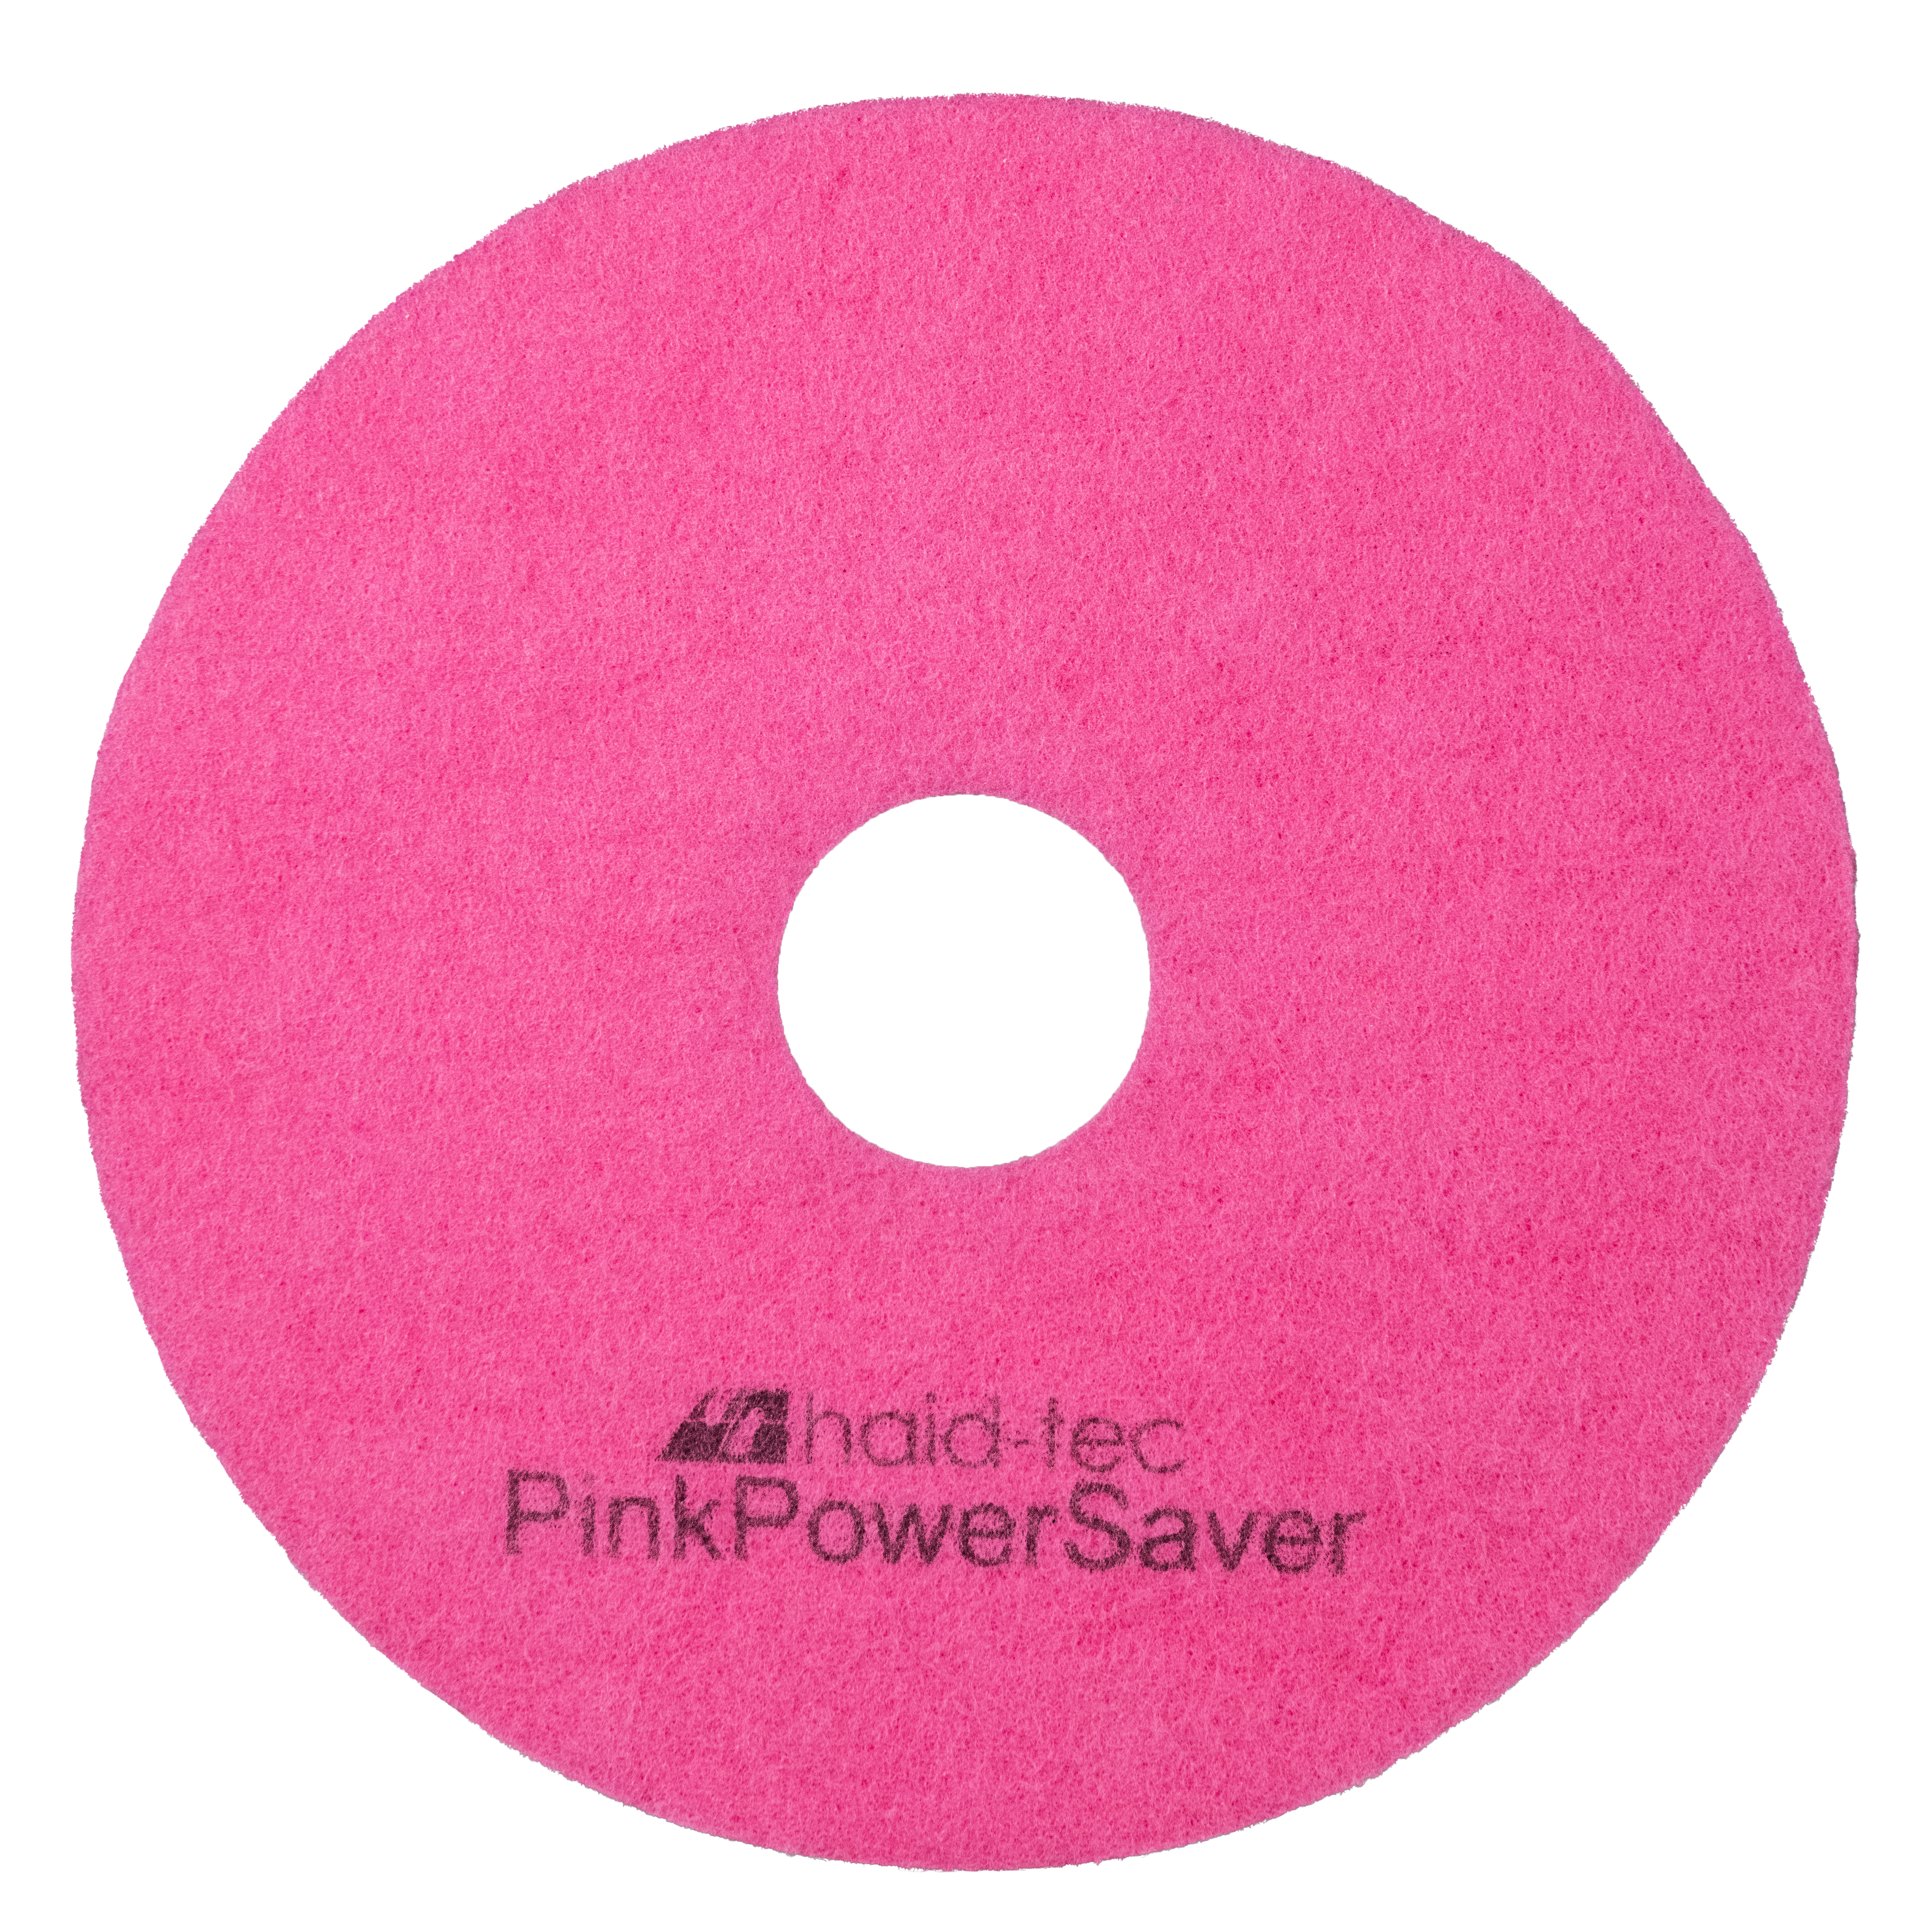 PinkPowerSaver Pad 10inch/254mm for i-mop XXL, pad for compact scrubber dryer - melamine pad for intensive and maintenance cleaning